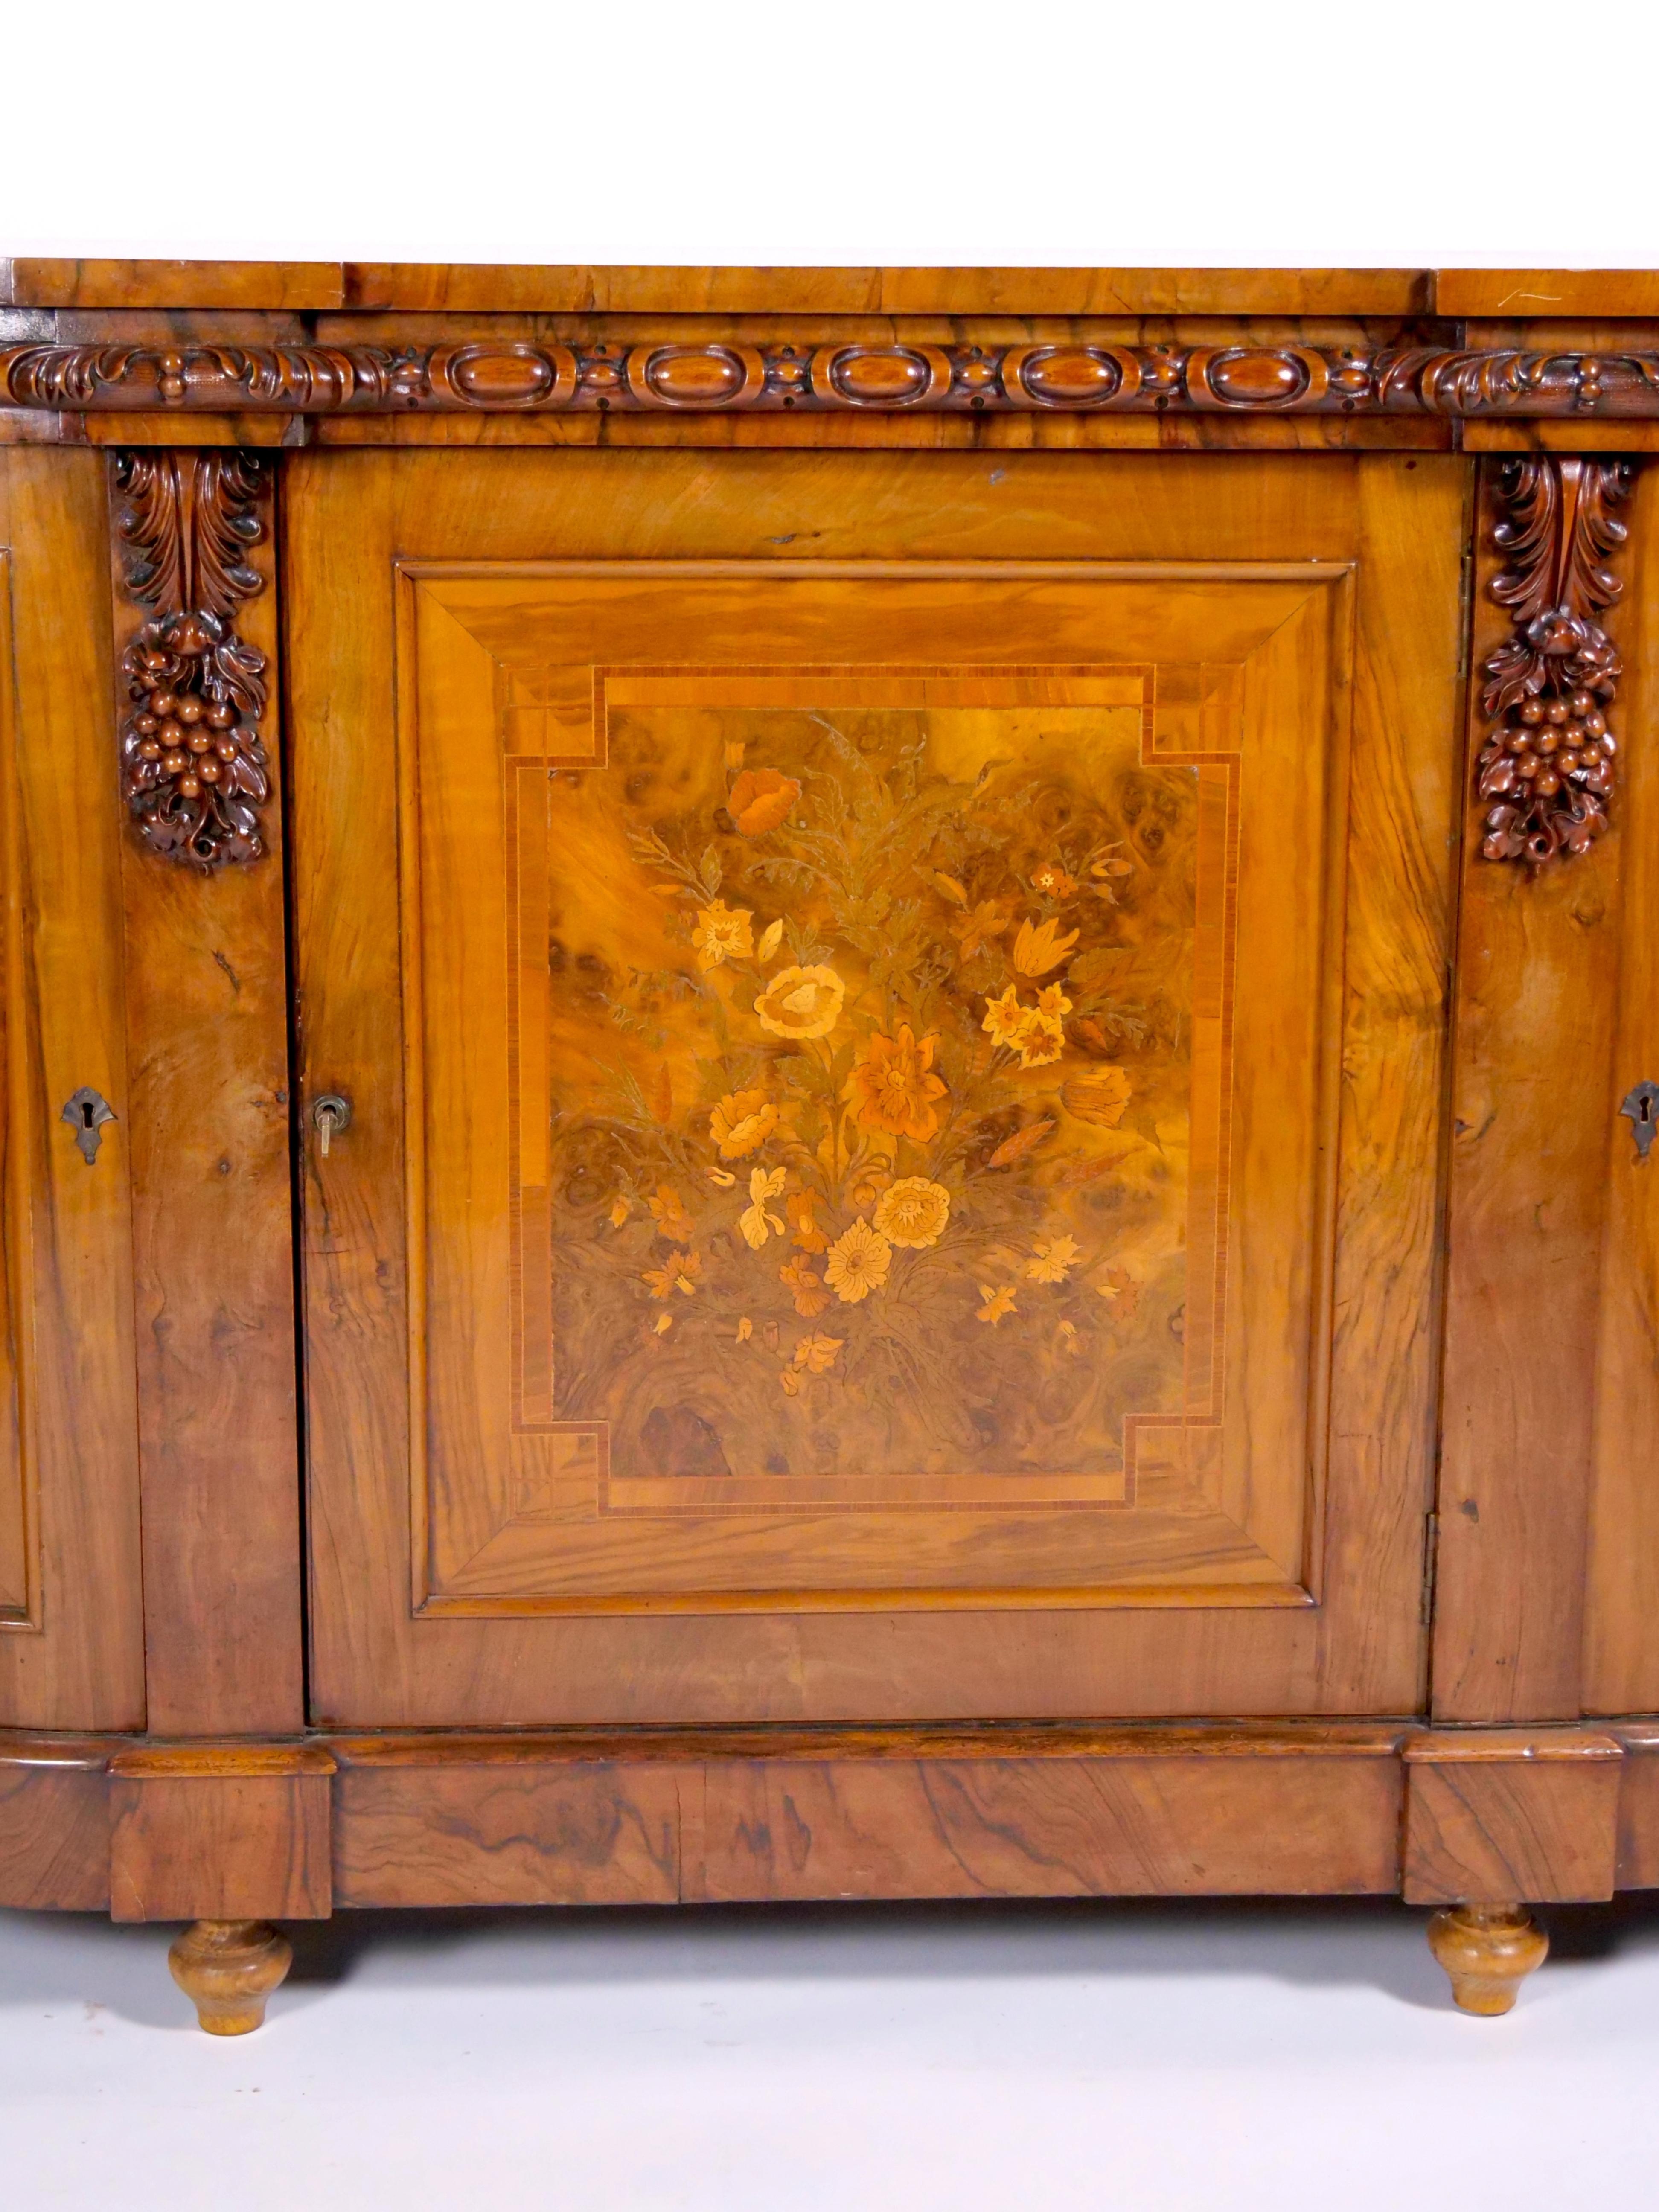 Early 19th Century English Victorian Style Walnut Marquetry Credenza / Sideboard For Sale 11